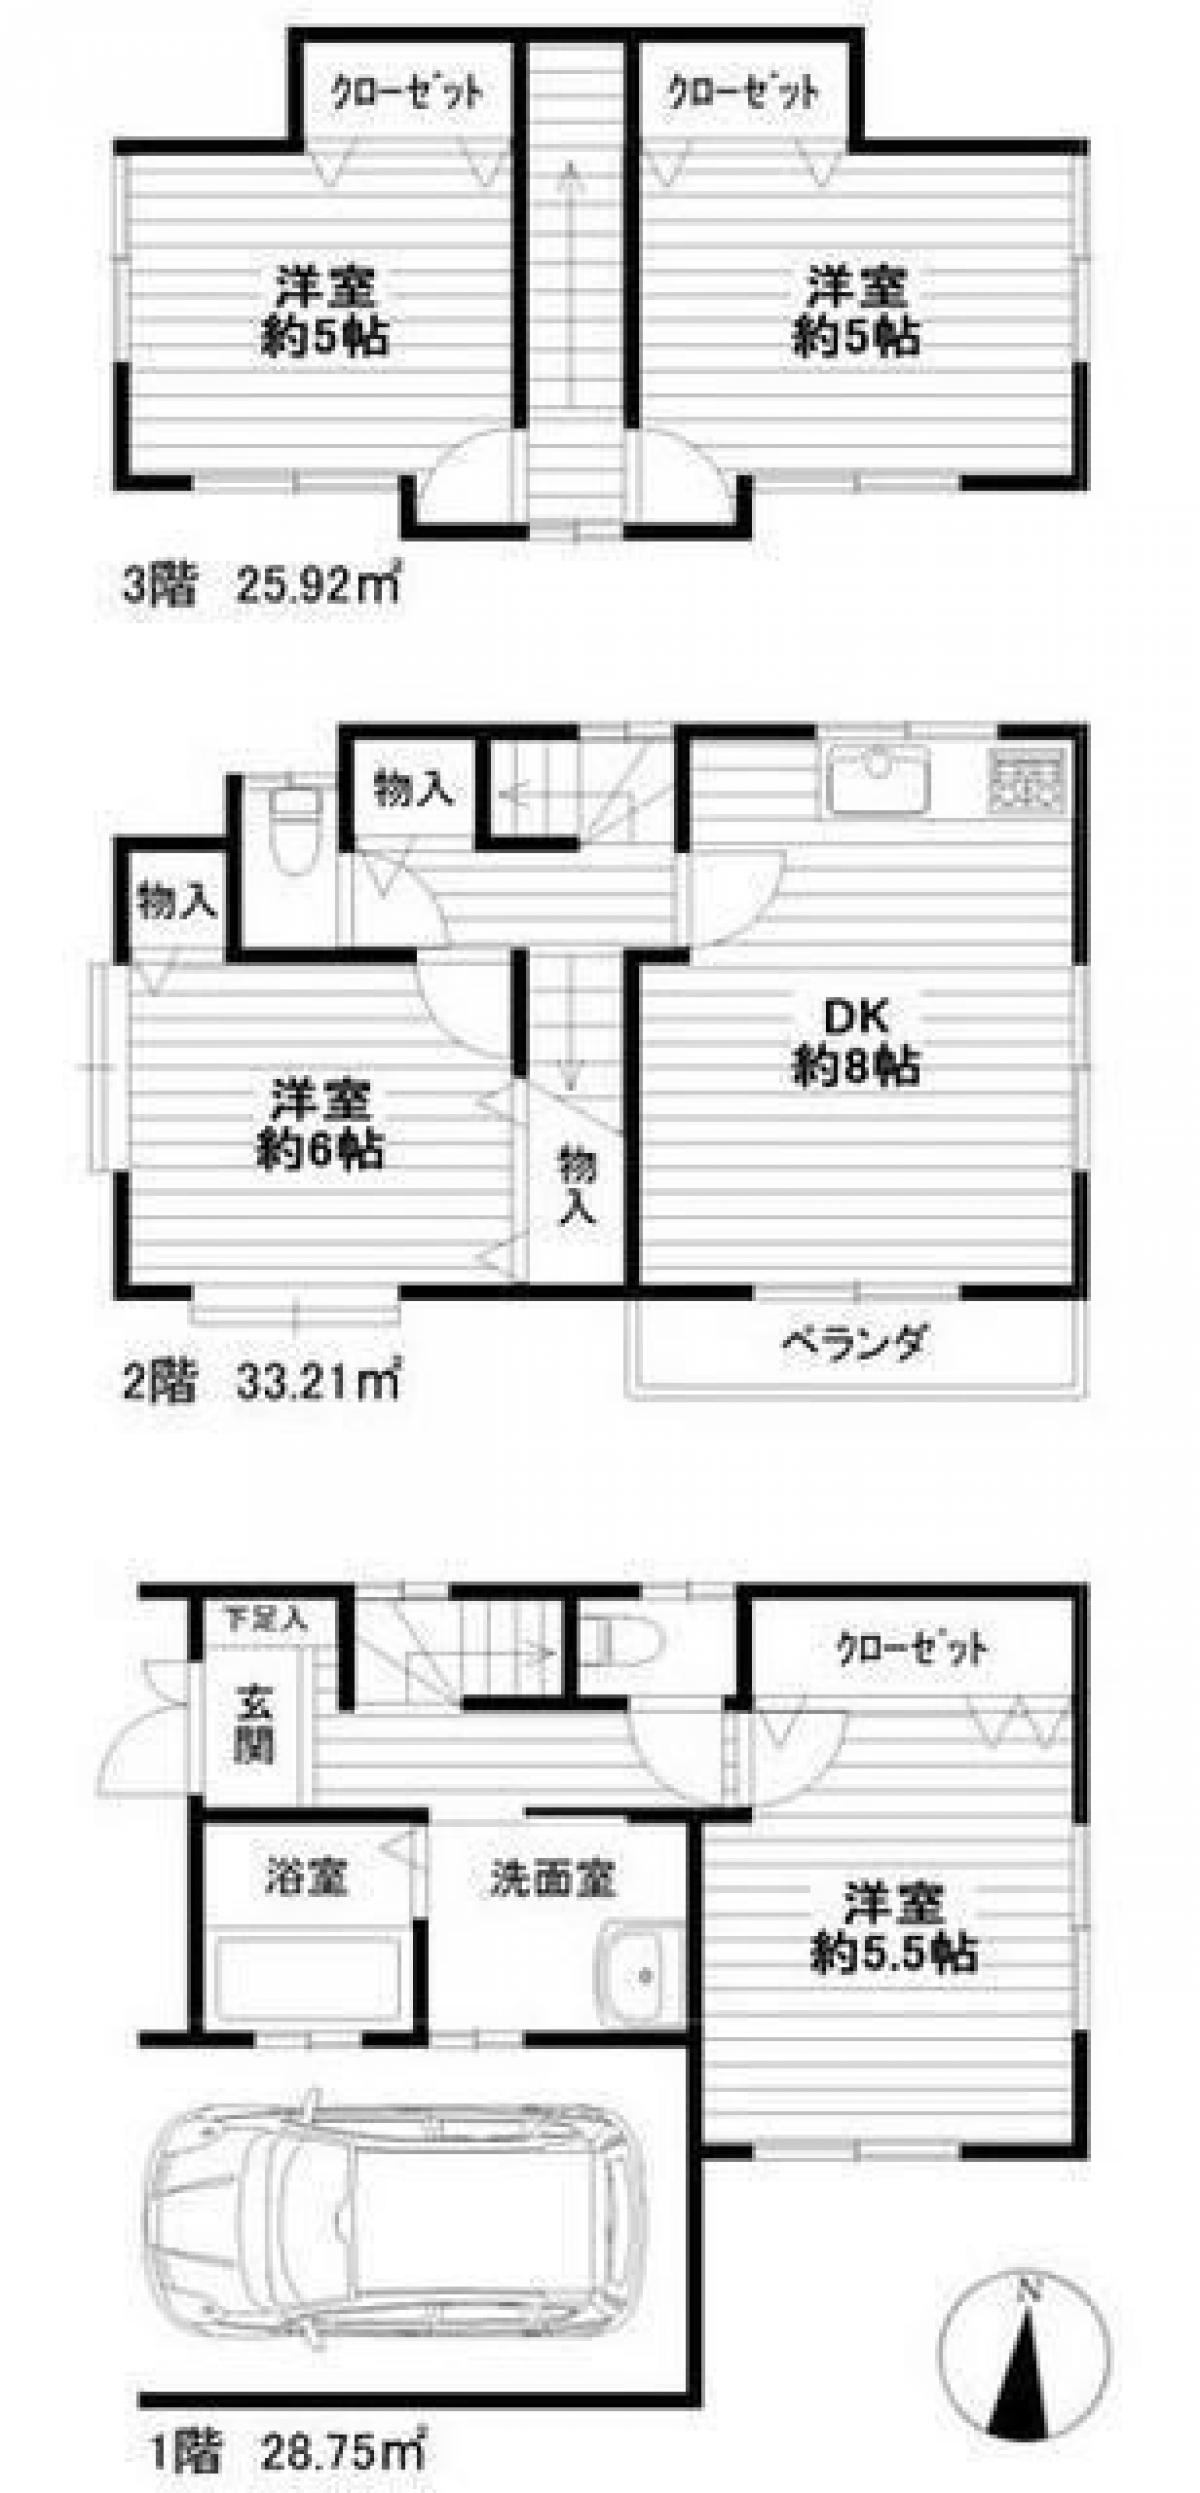 Picture of Home For Sale in Kiyose Shi, Tokyo, Japan